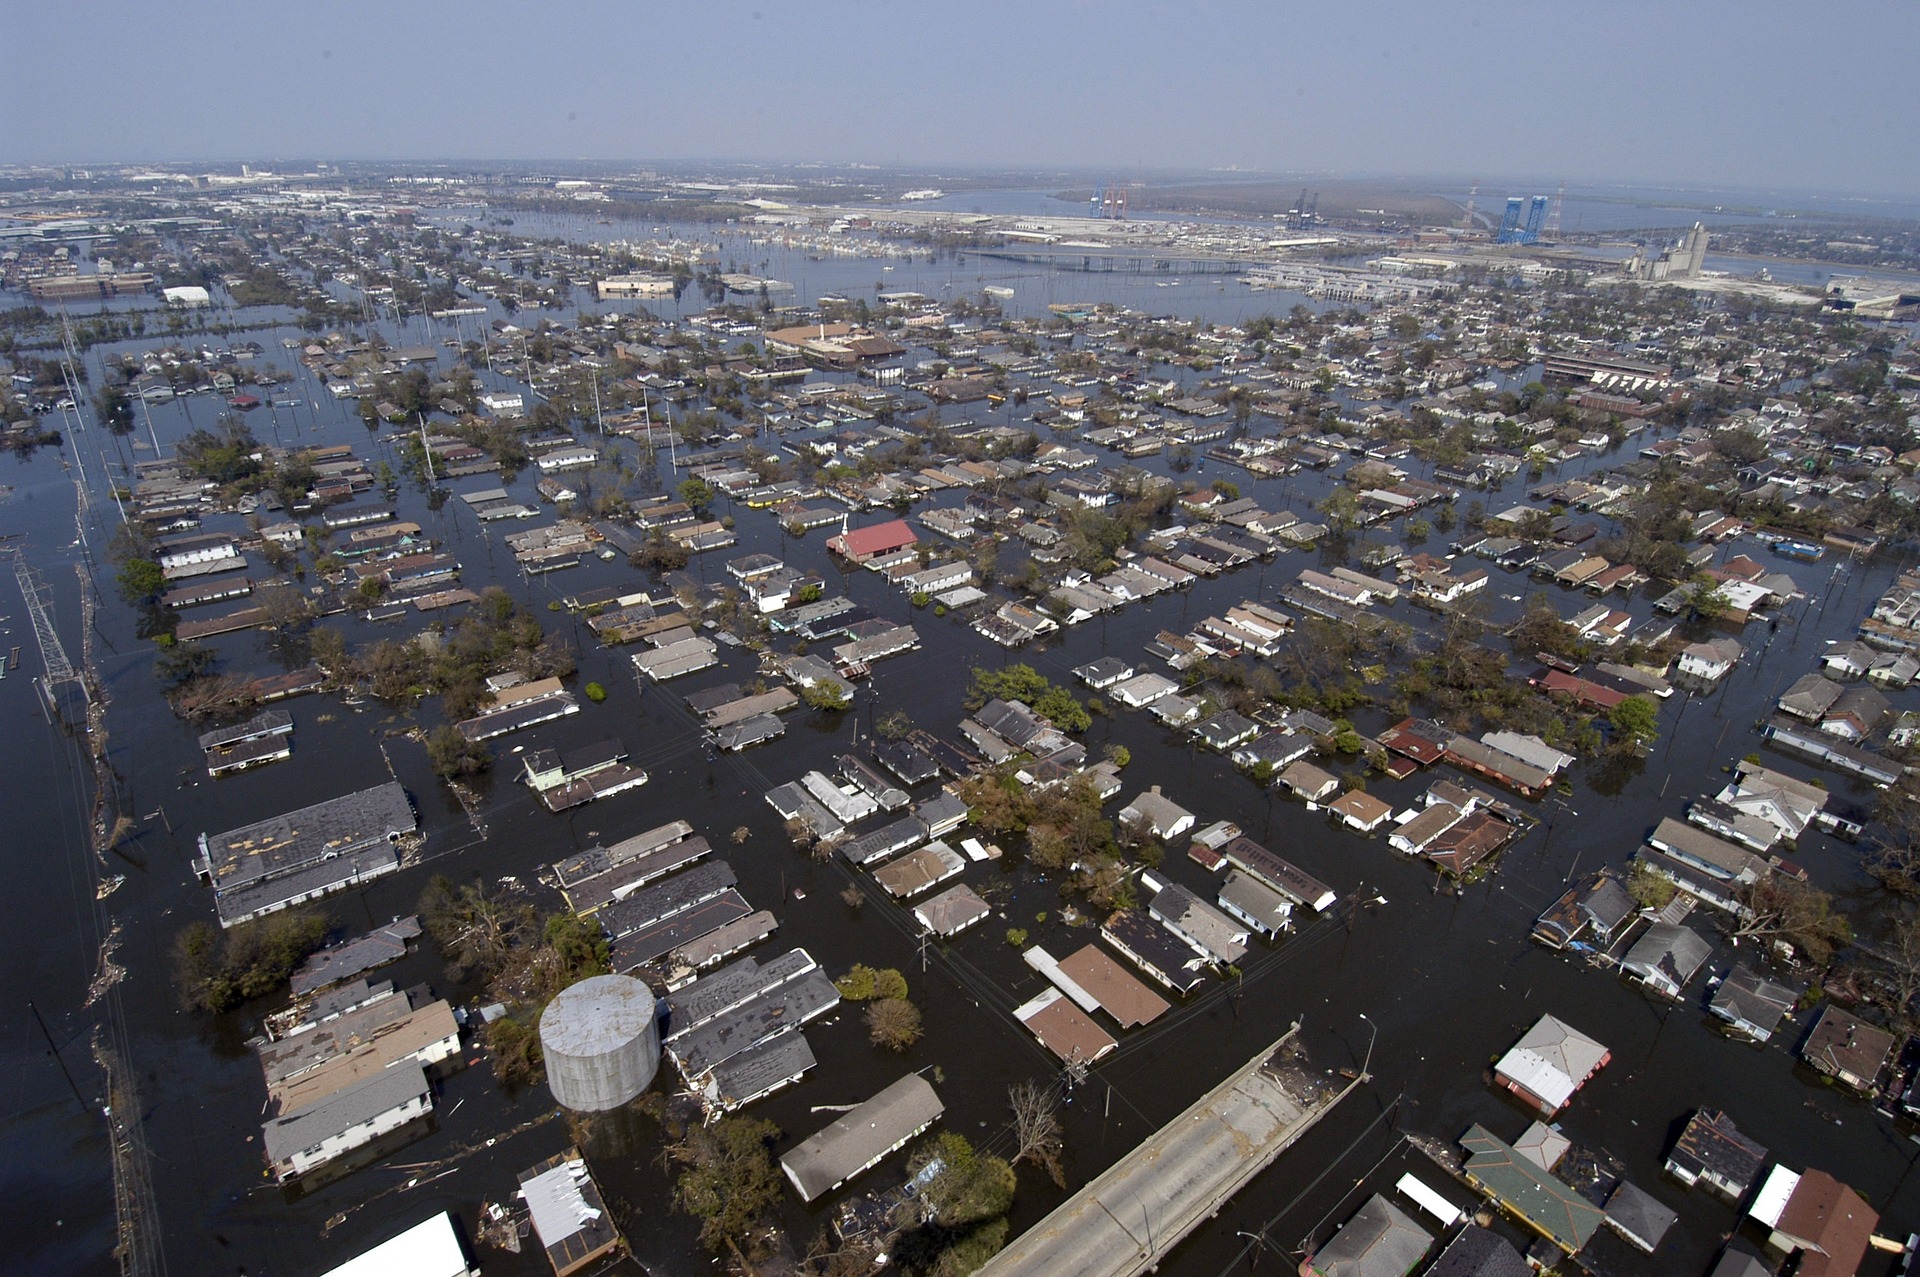 Flood in New Orleans after hurricane Katrina. 